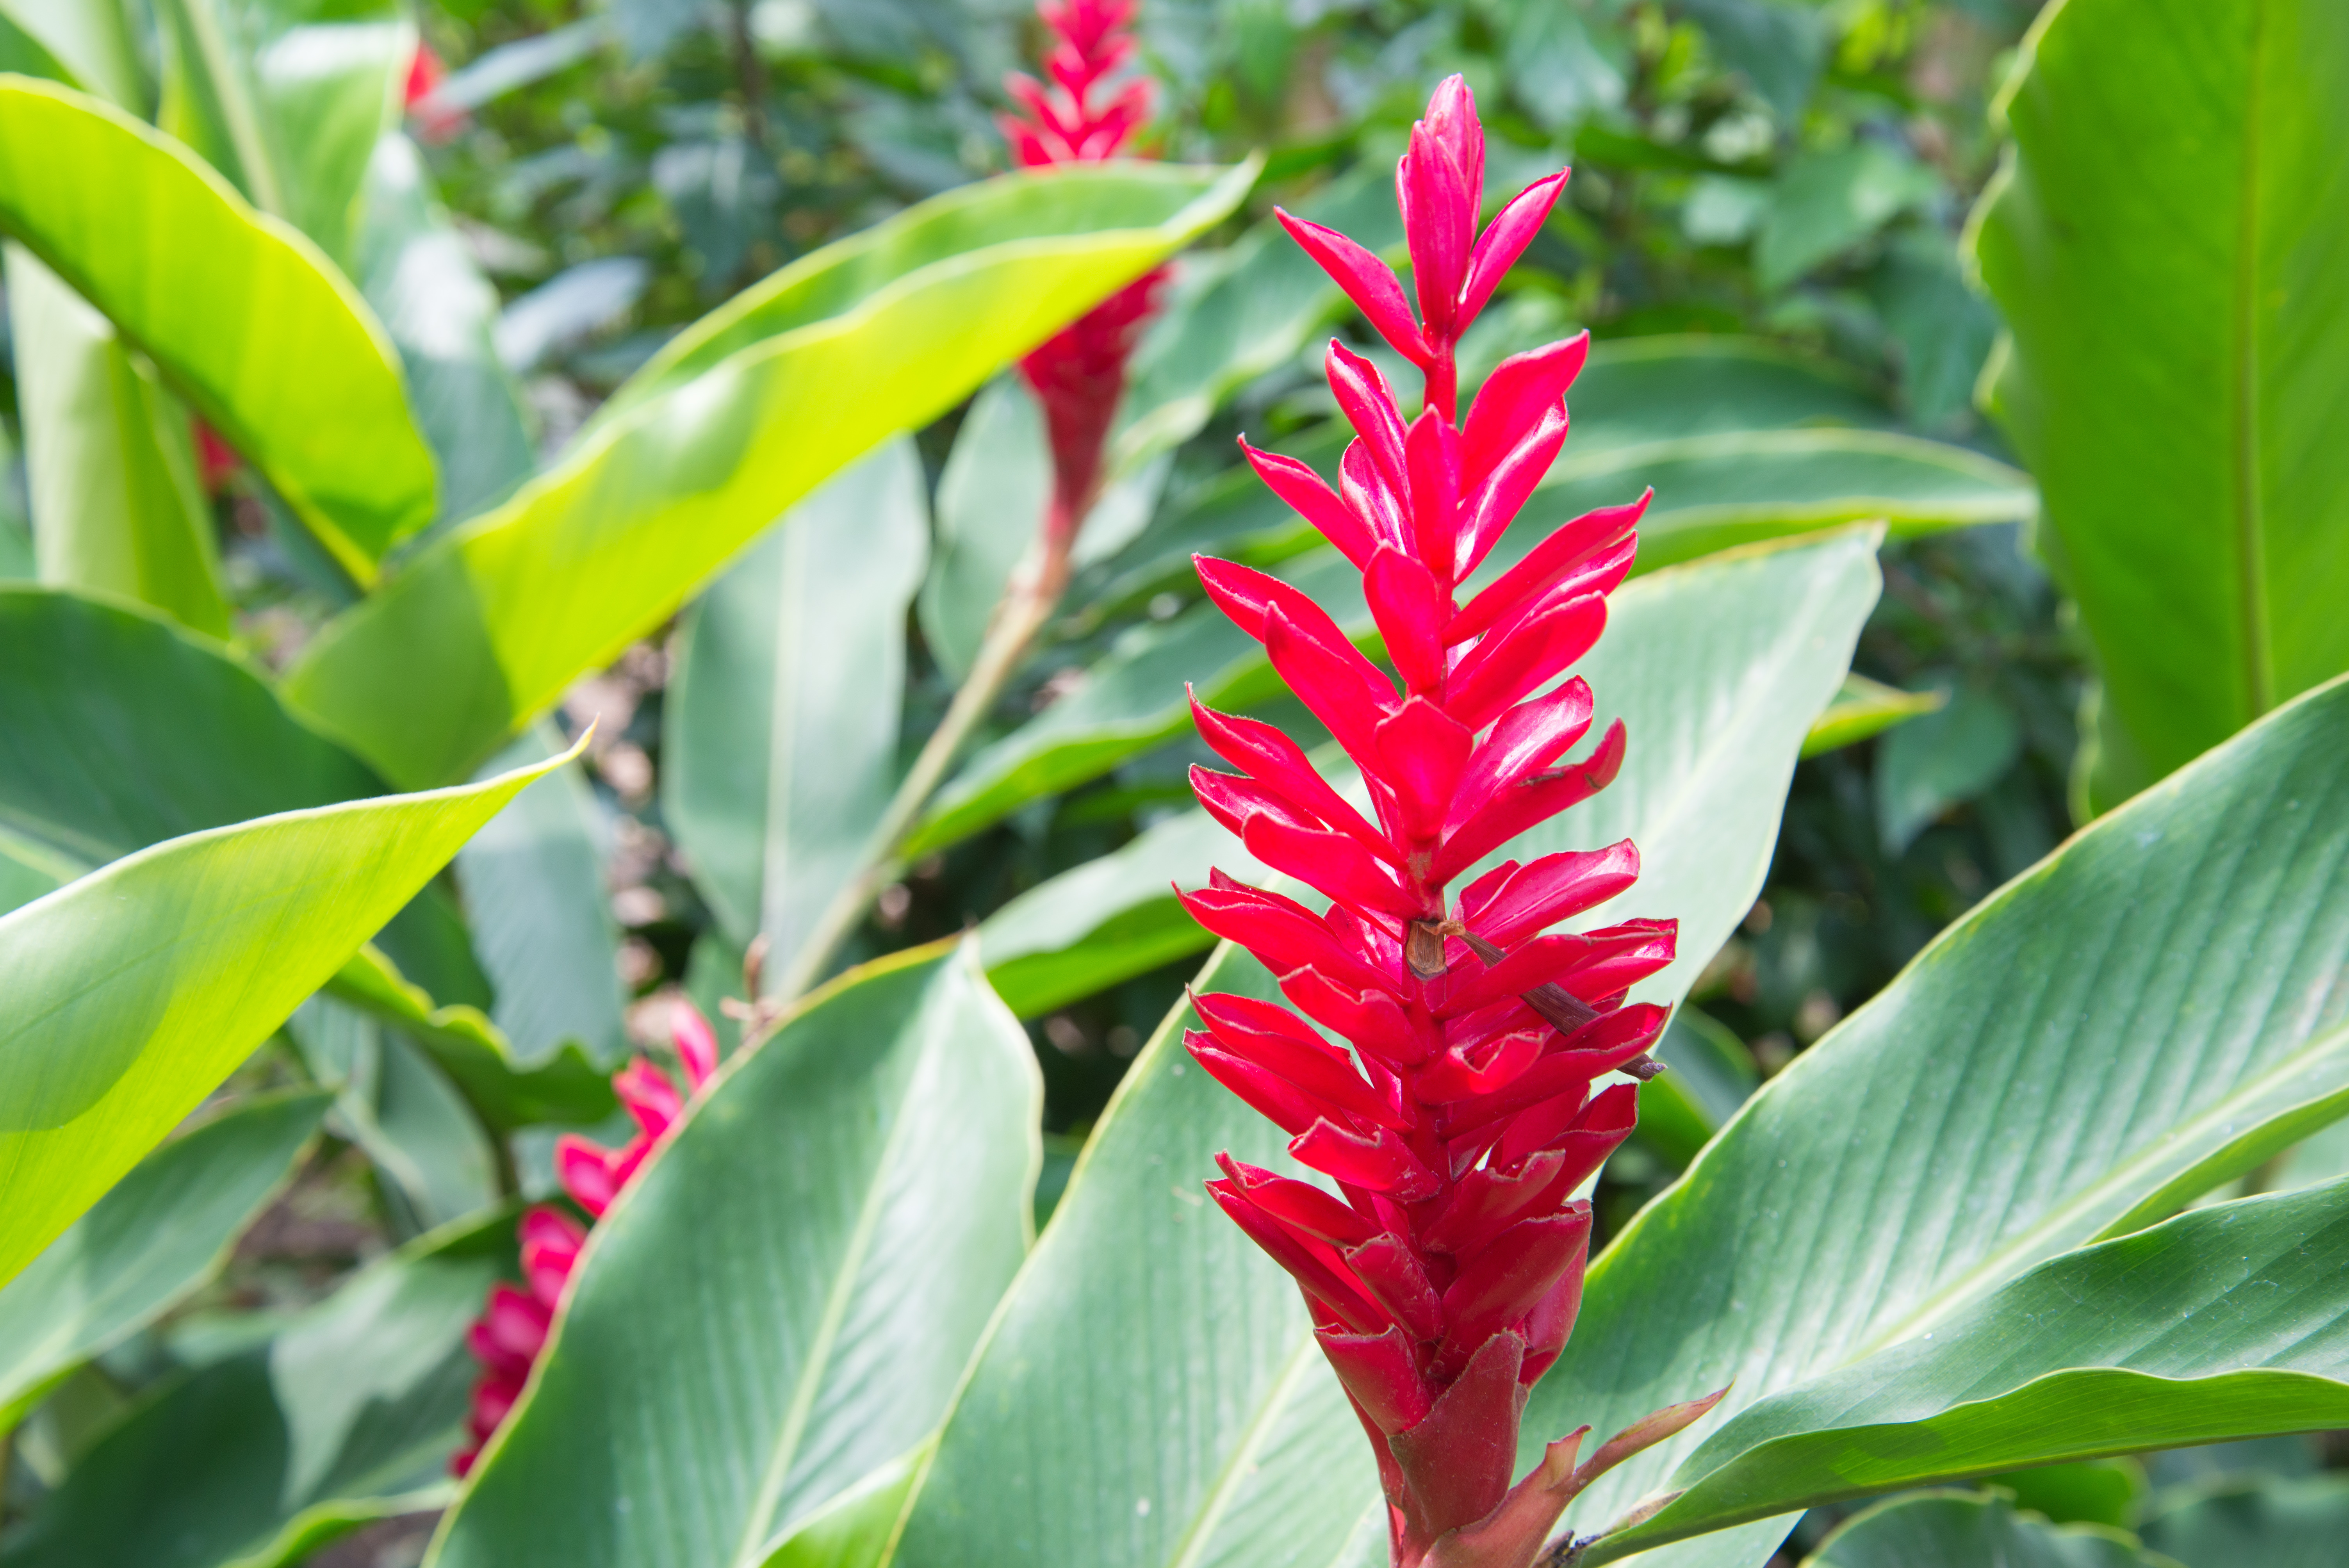 Red ginger flower in the foreground, on the left, with blurred green leaves background. Guayaquil, Ecuador